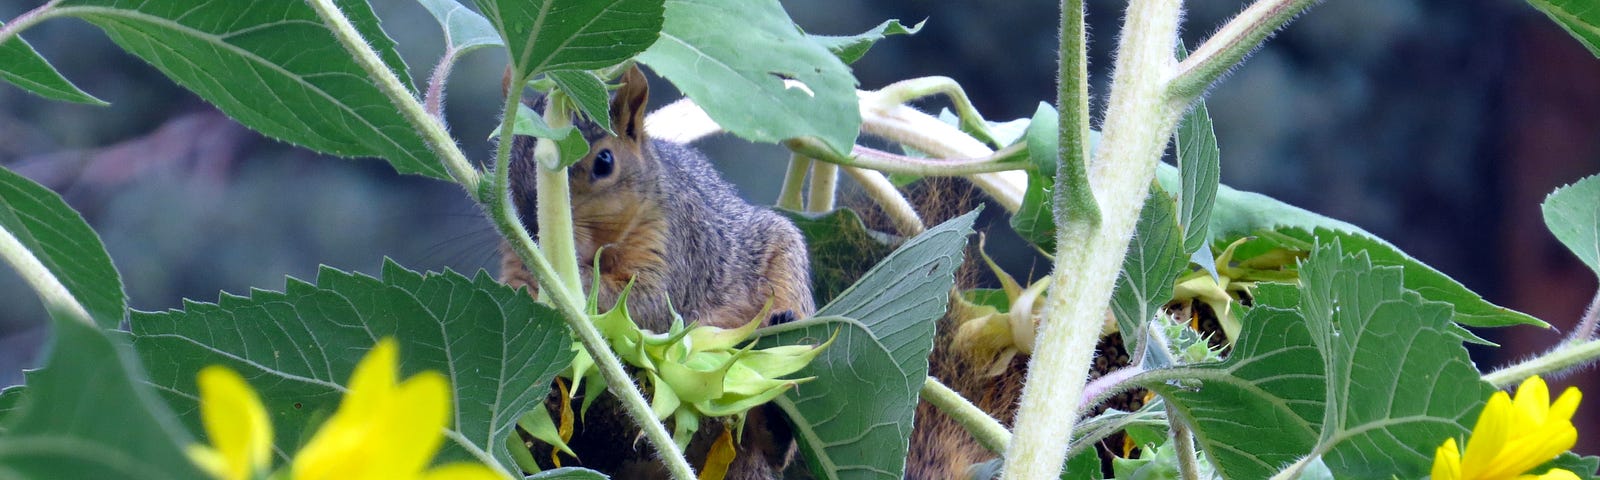 A gray and brown squirrel sitting on a sunflower in a sunflower patch eating a sunflower seed and peeking past sunflower leaves and branches towards the camera.